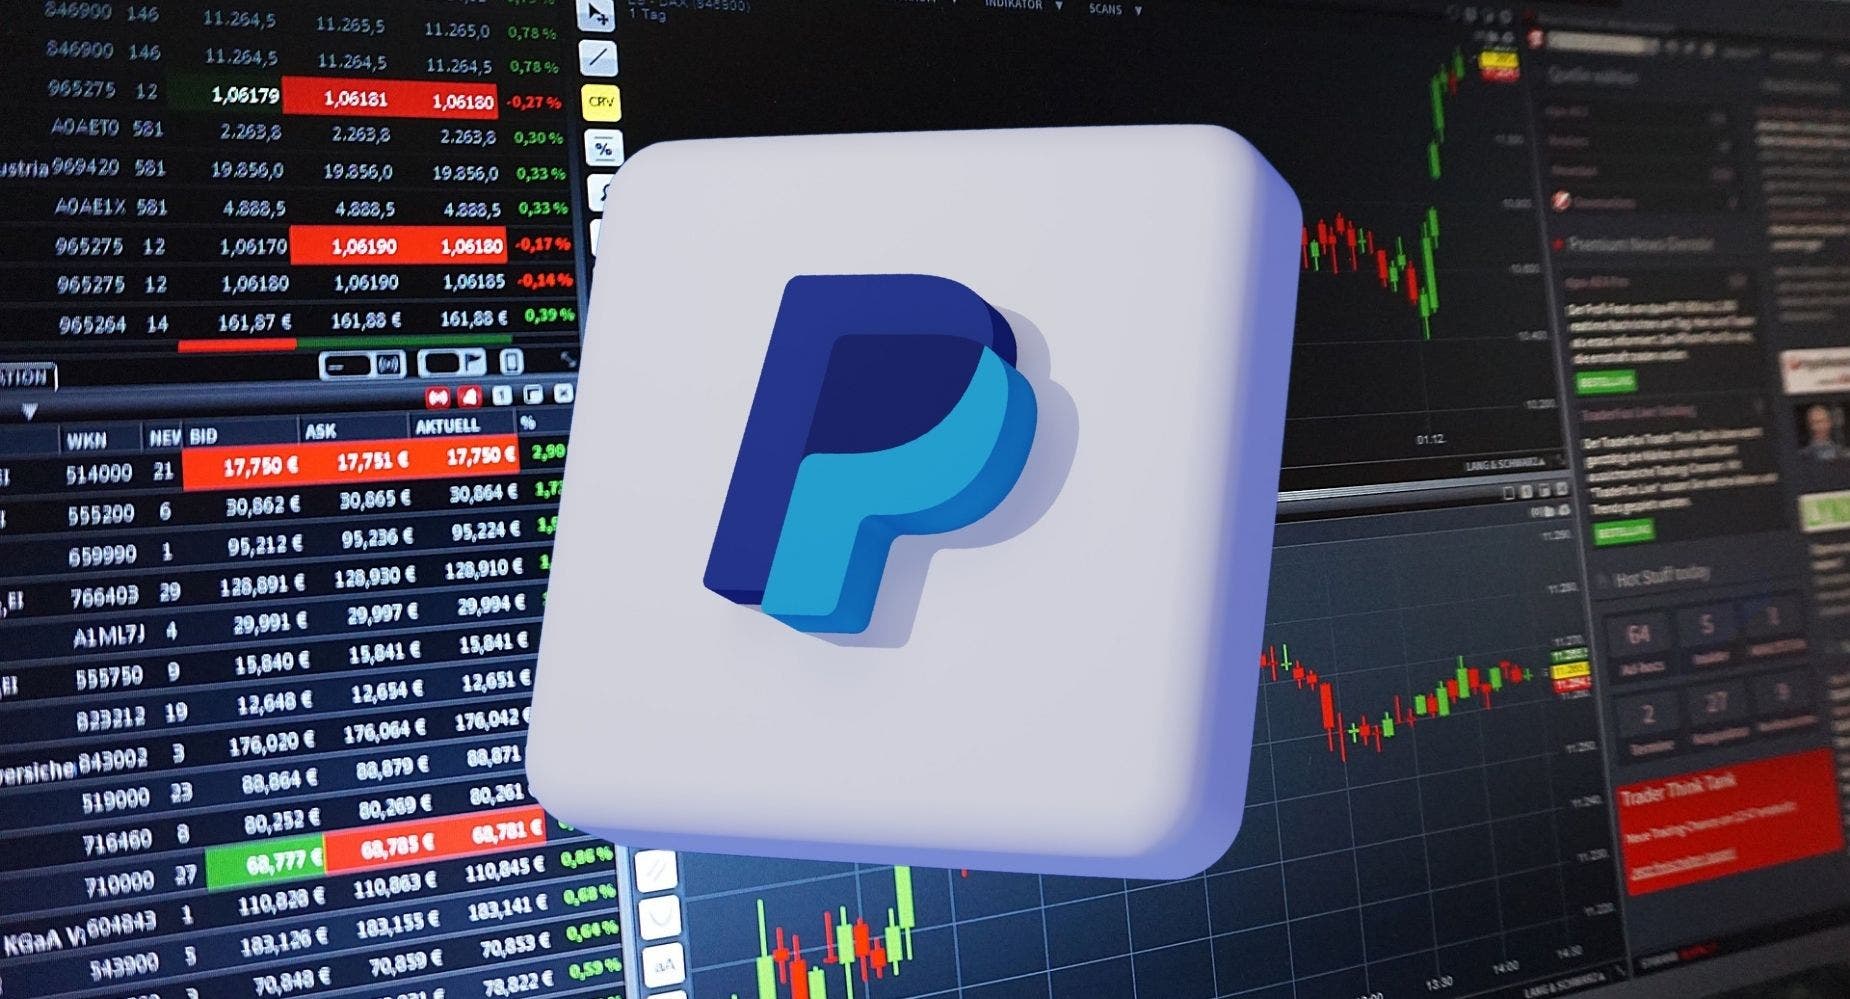 If You Invested $1,000 In PayPal (PYPL) Stock At Its COVID-19 Pandemic Low, Here's How Much You'd Have Now